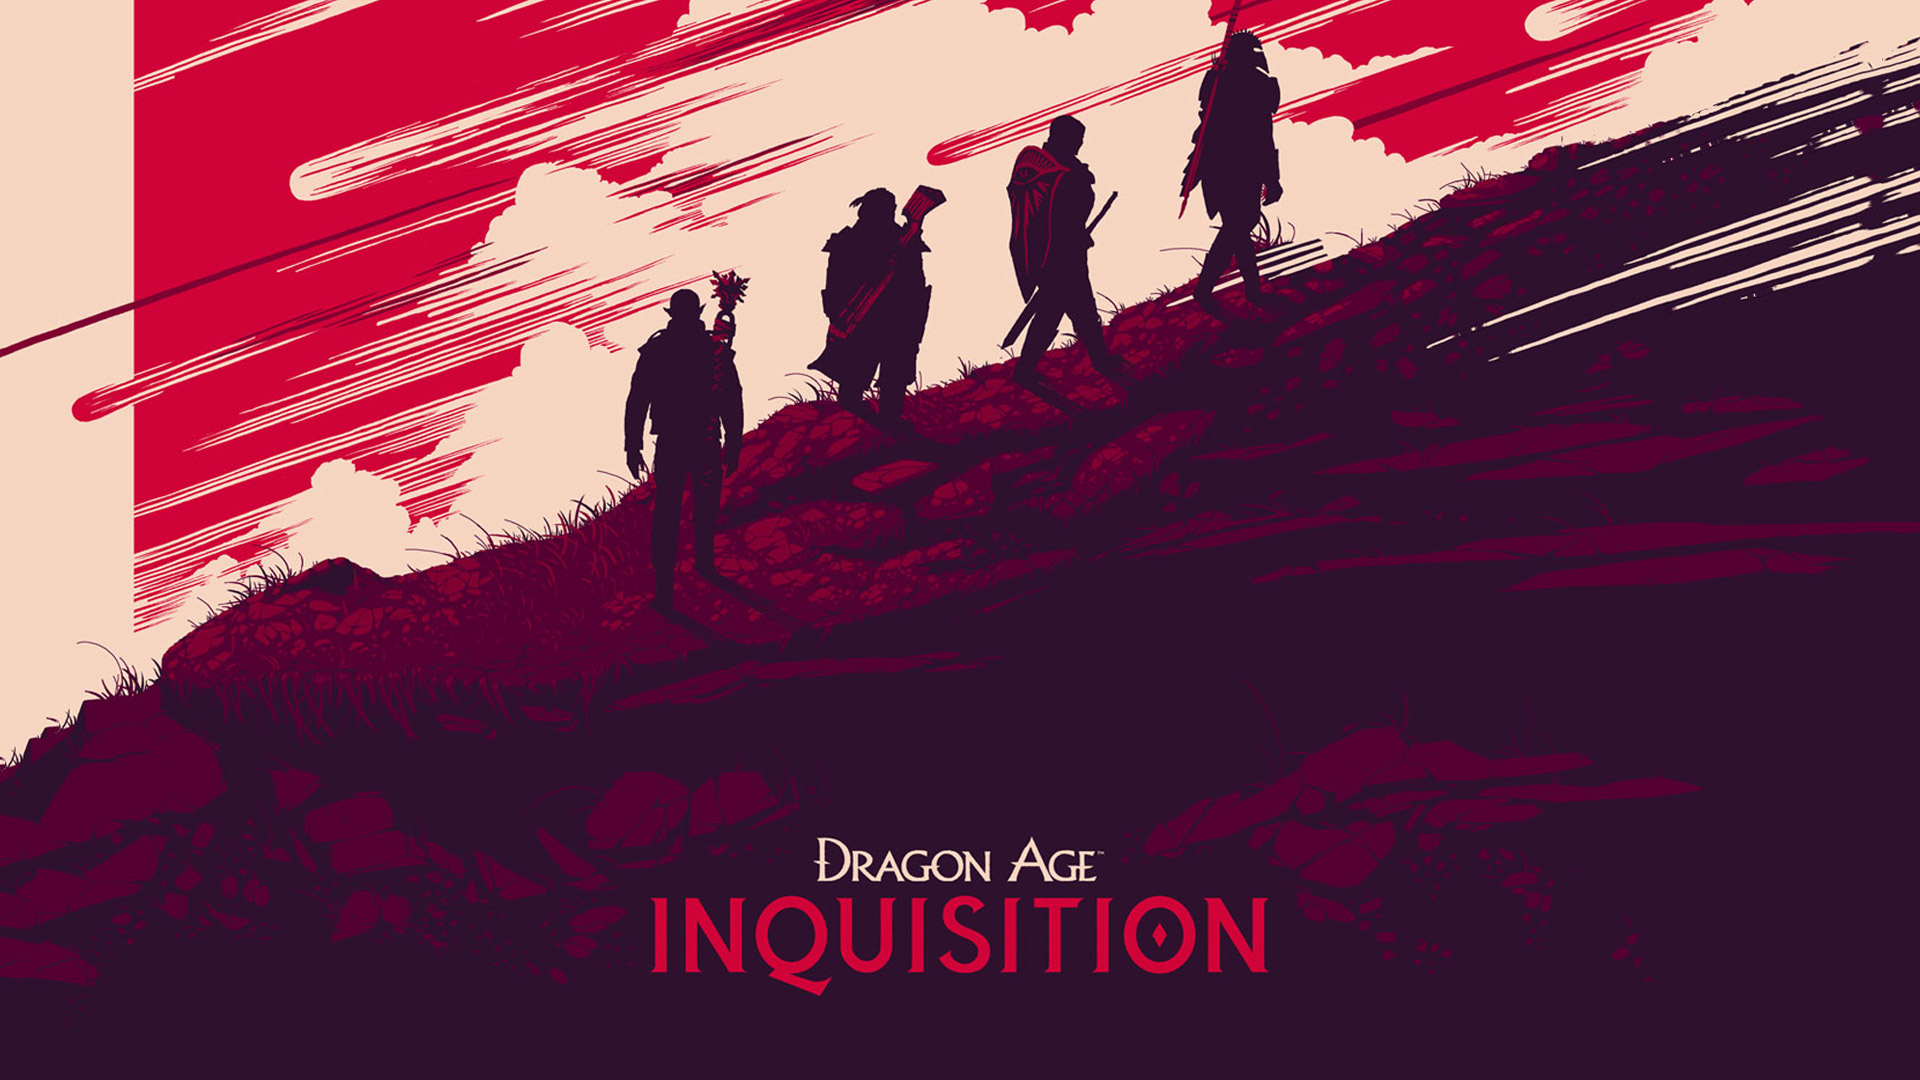 Dragon Age Inquisition Wallpaper - Dragón Age Inquisition Ps4 , HD Wallpaper & Backgrounds